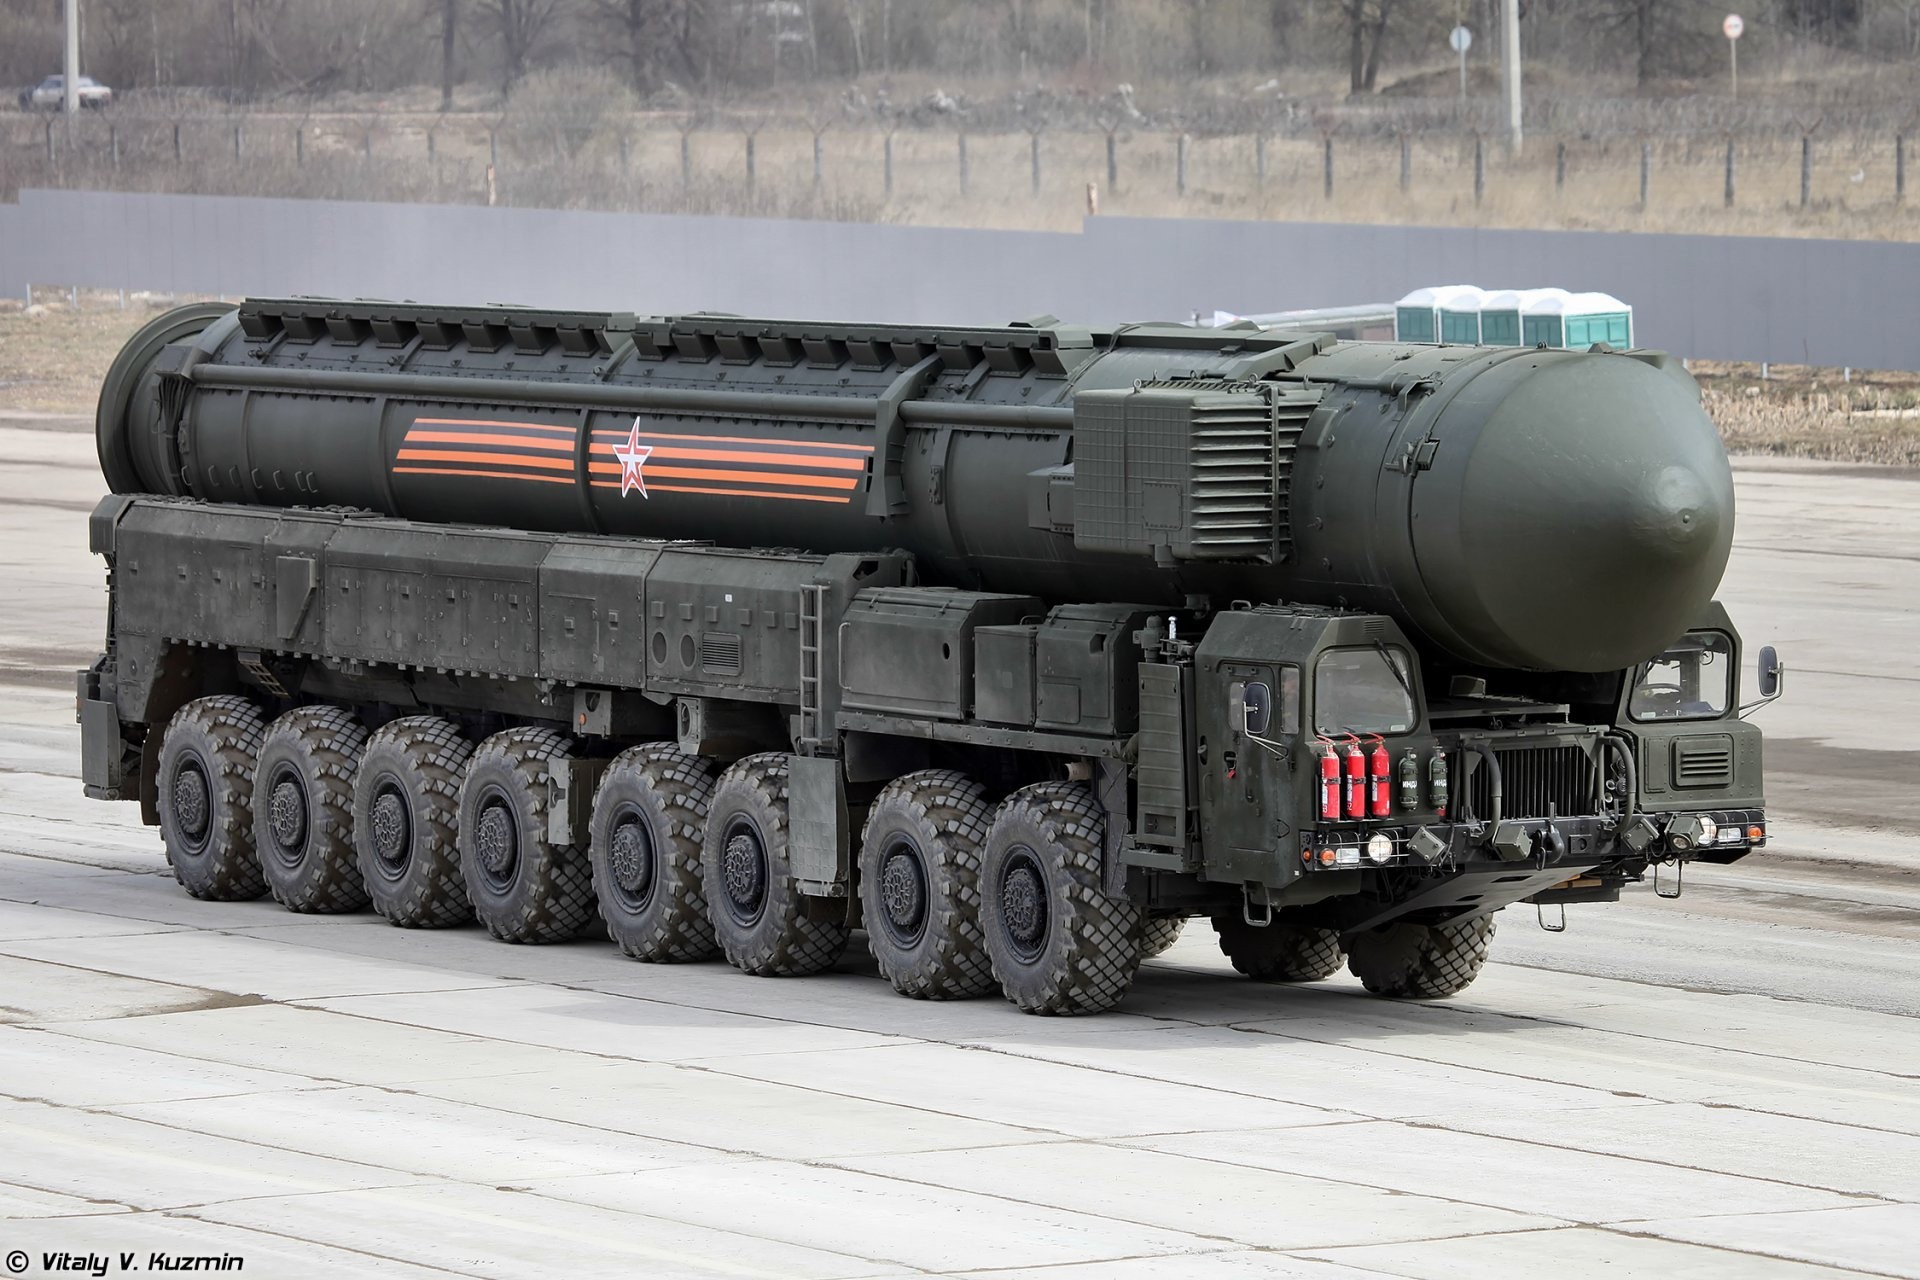 General 1920x1280 ICBM military vehicle weapon missiles Russian Army military vehicle nuclear MAZ